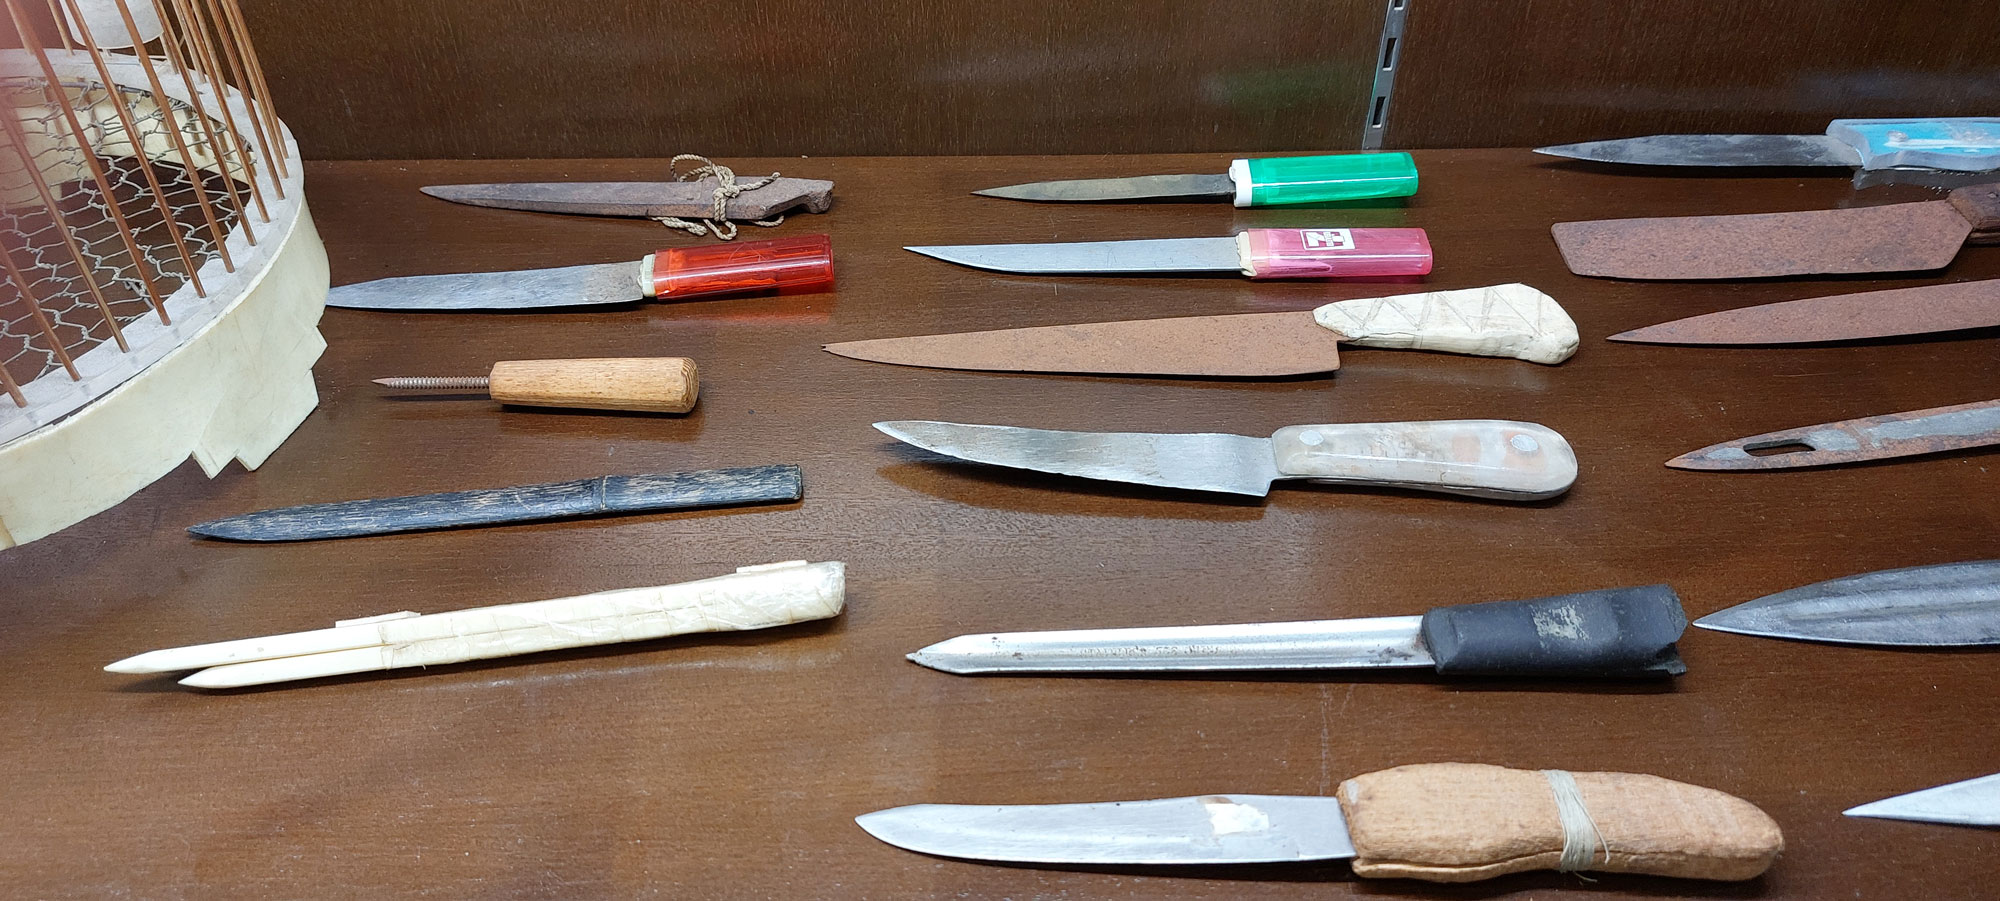 Home-made daggers and small size weapons.